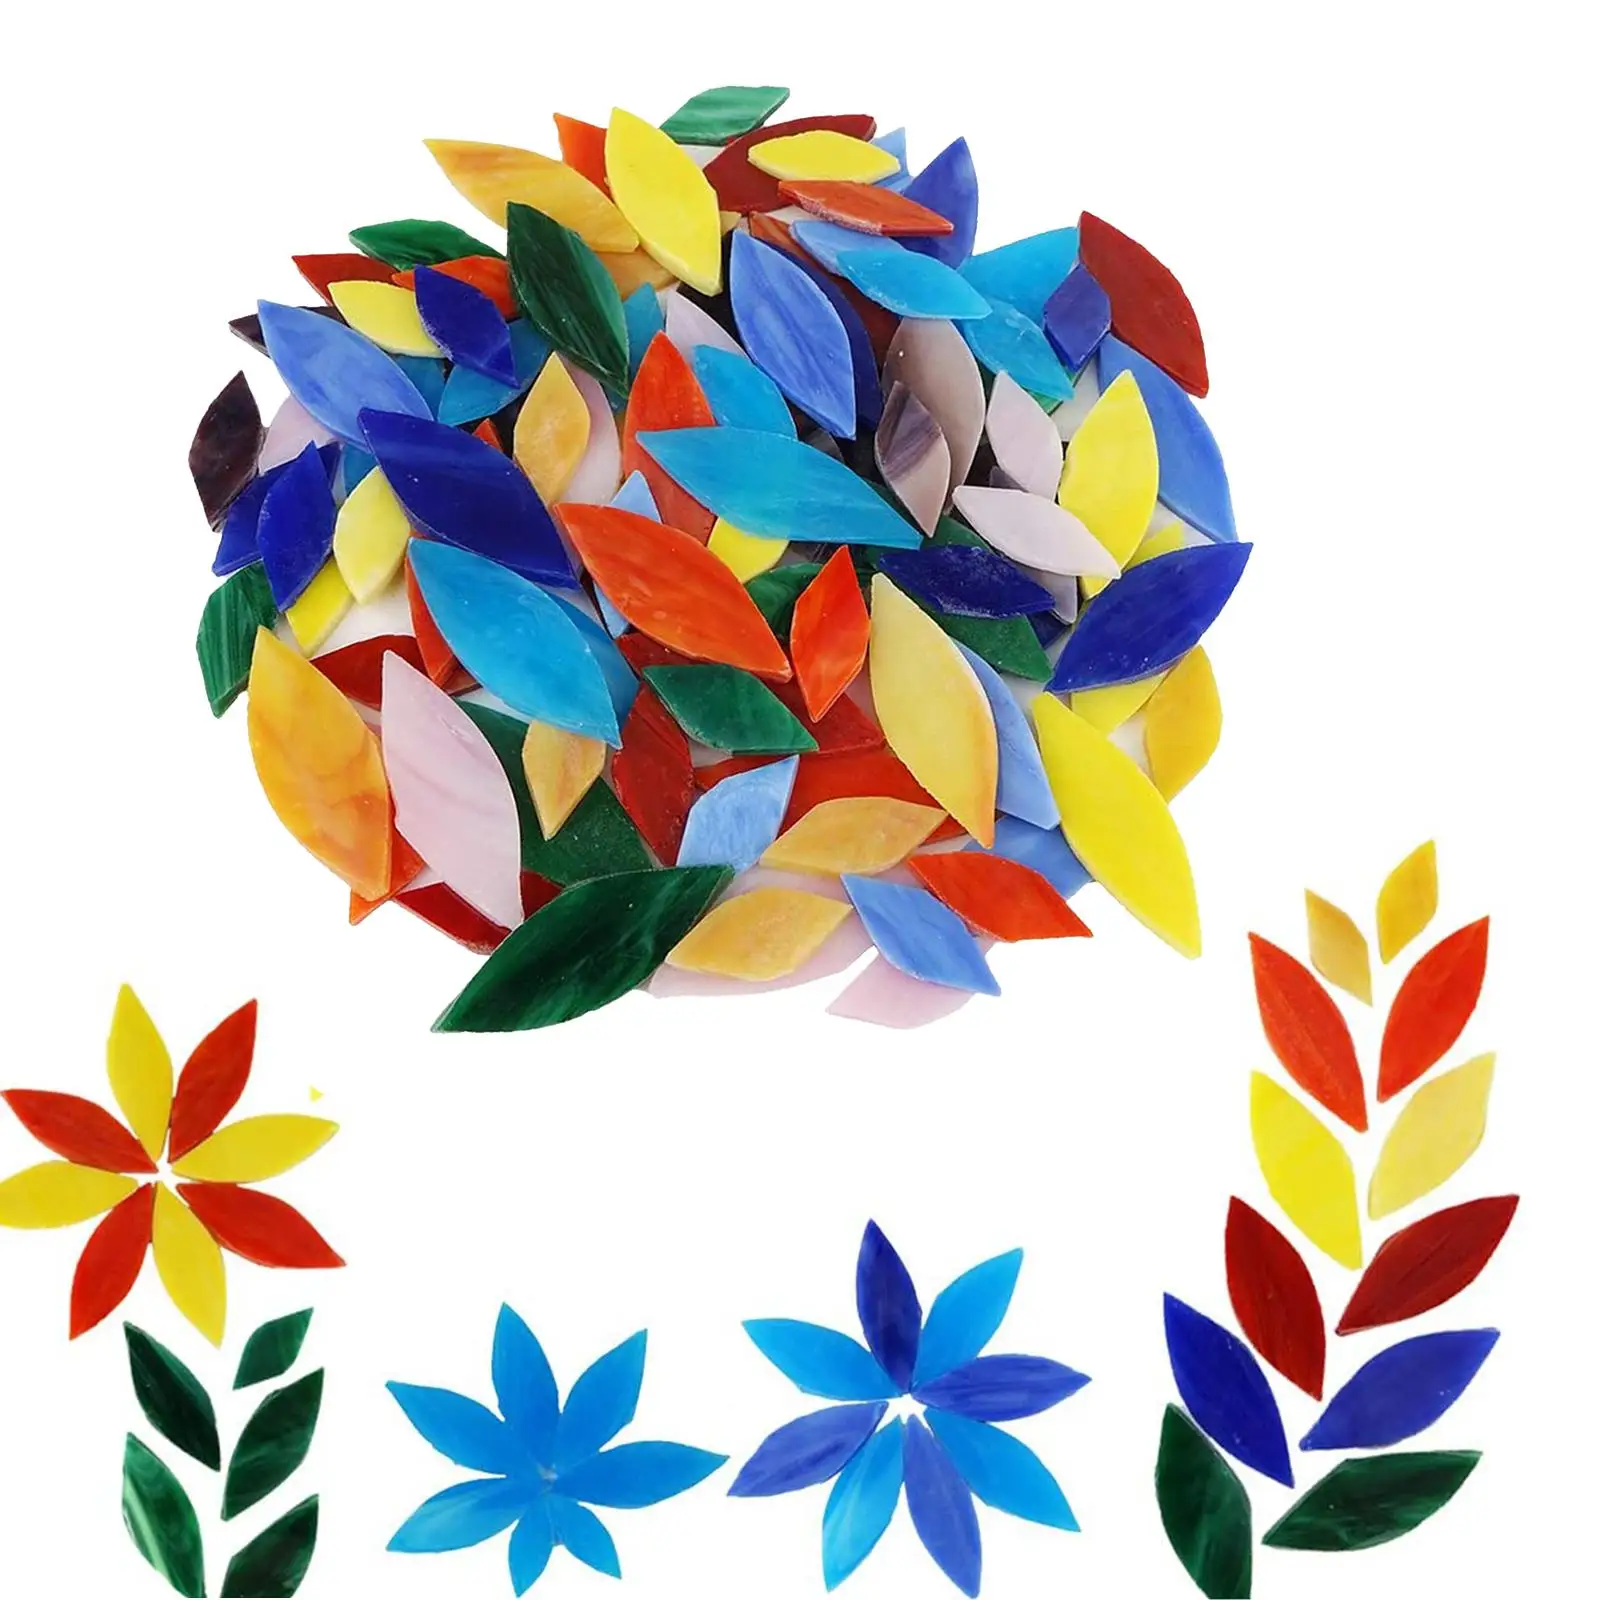 100 Pieces Mosaic Tiles Flower Leaves Hand-Cut Stained Glass Home Decoration